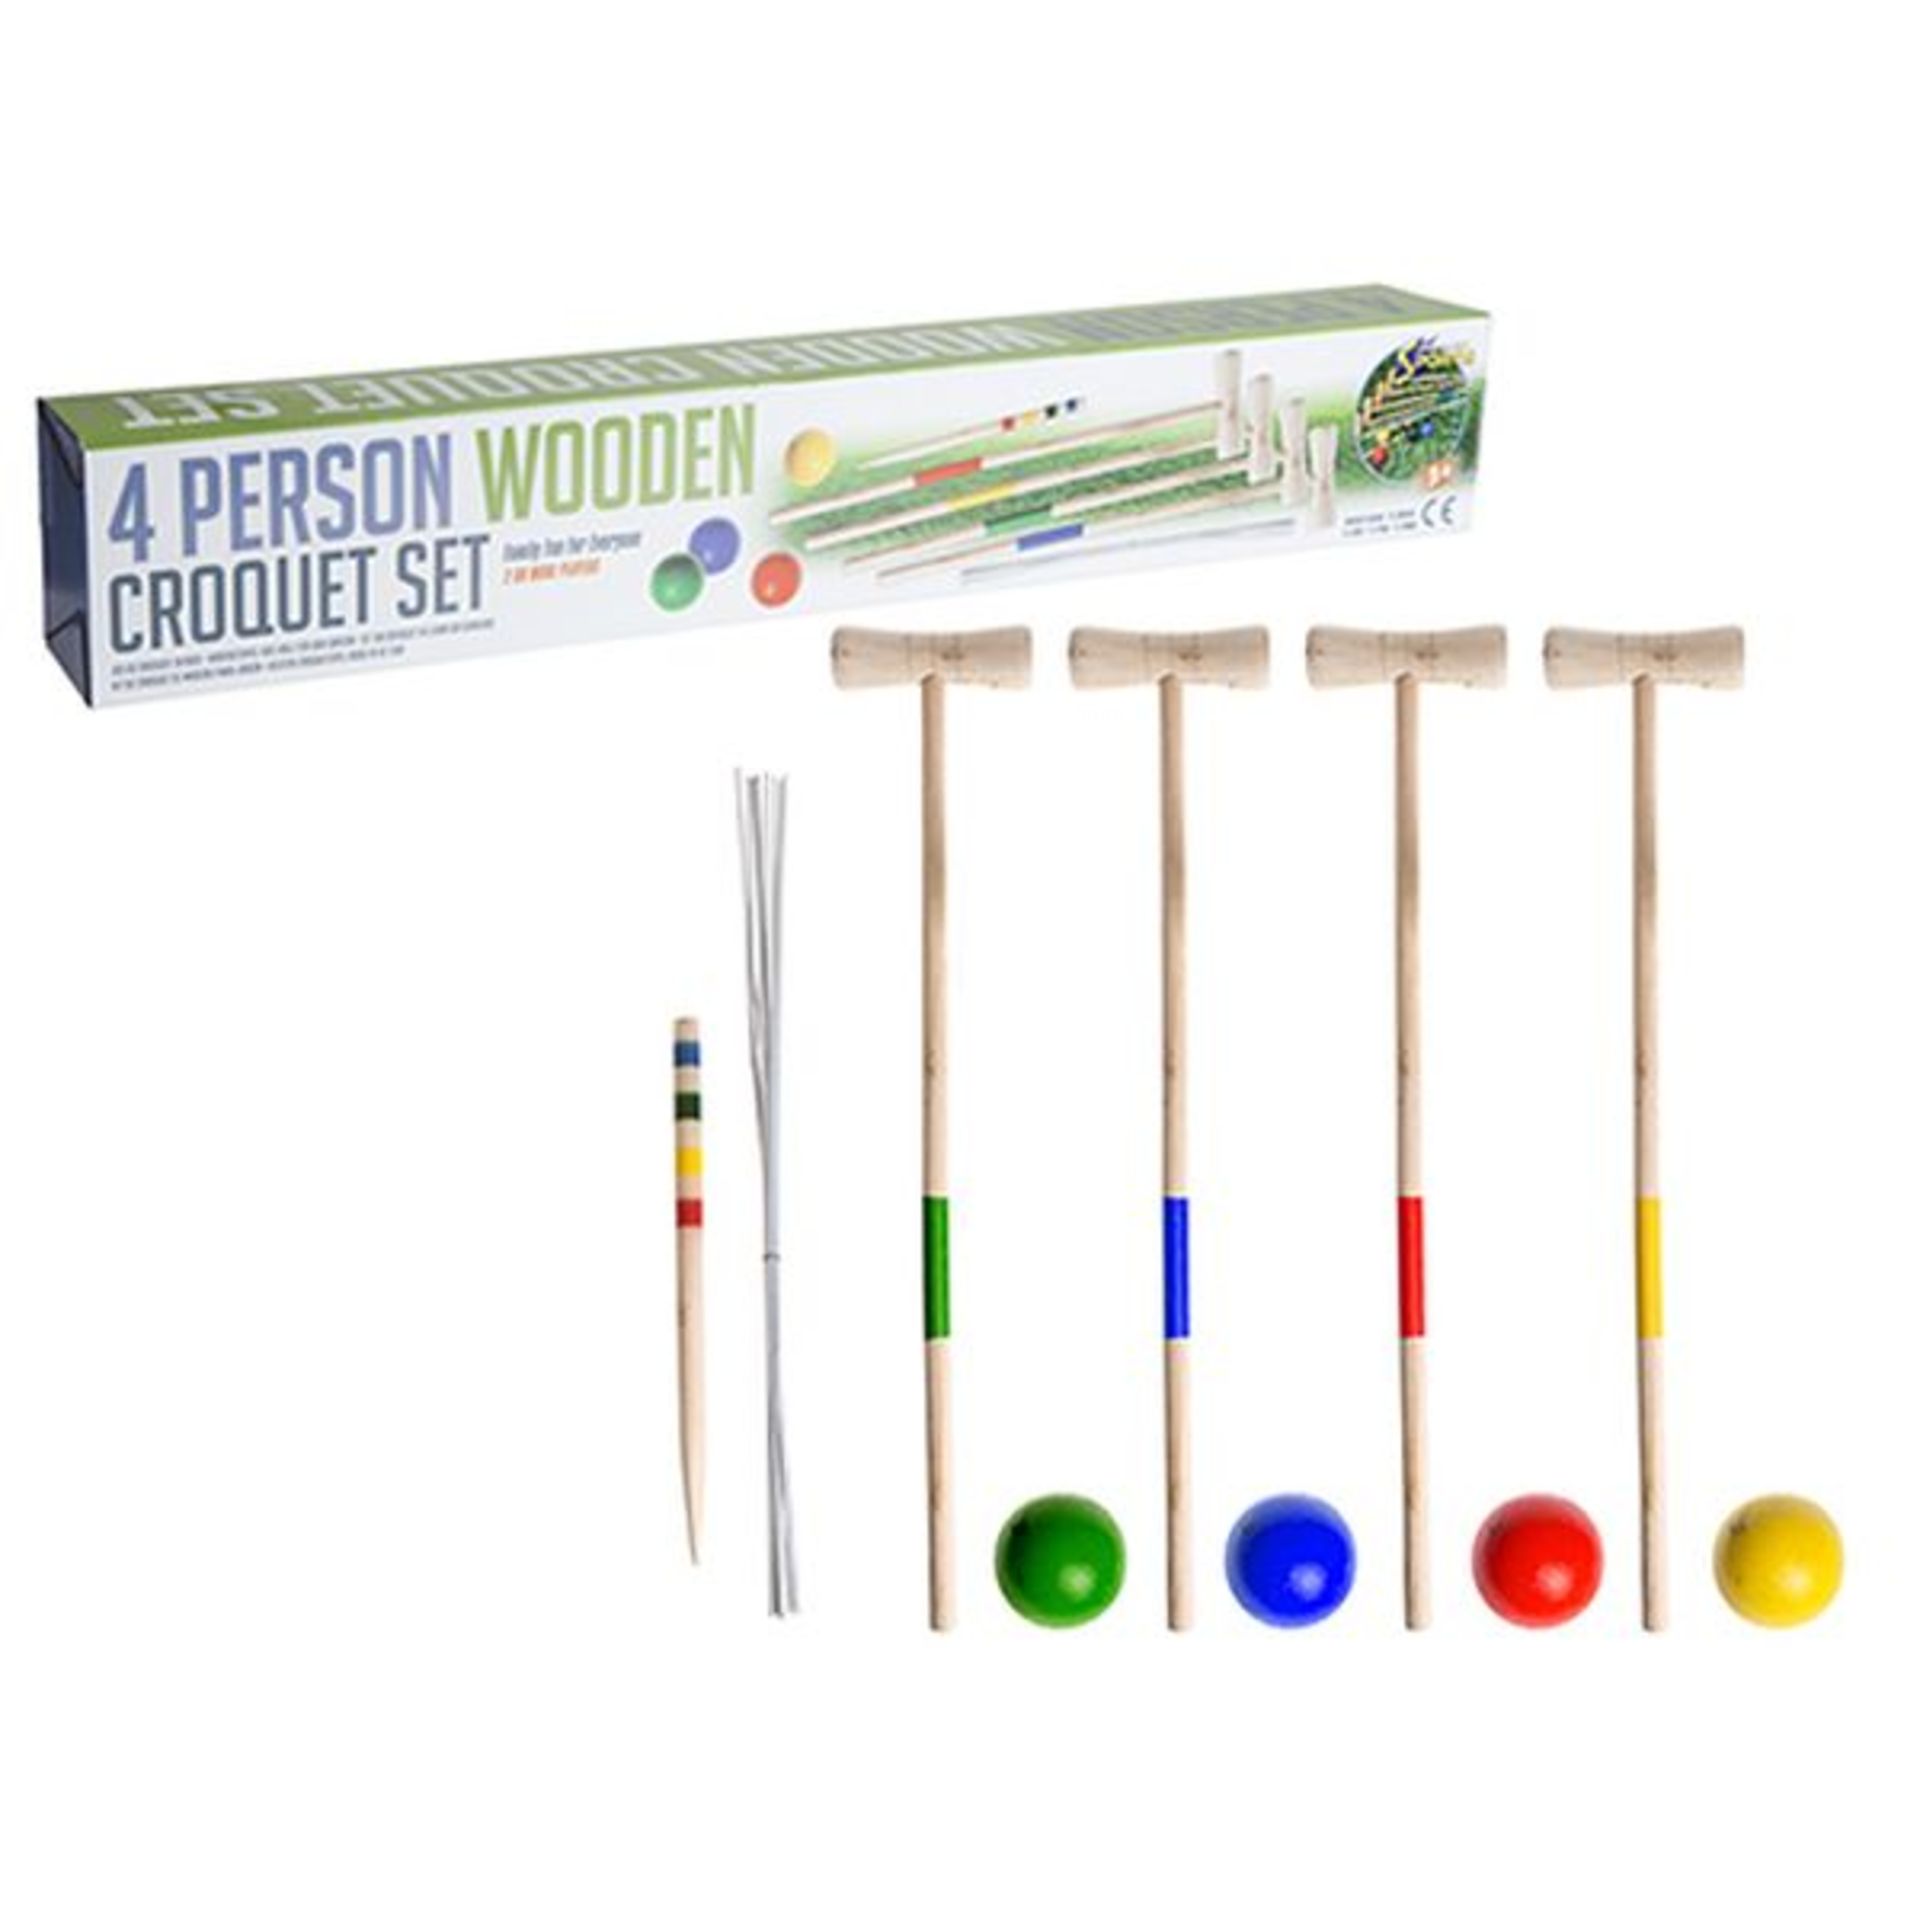 V *TRADE QTY* Brand New Premier Sports Four Person Wooden Croquet Set X 3 YOUR BID PRICE TO BE